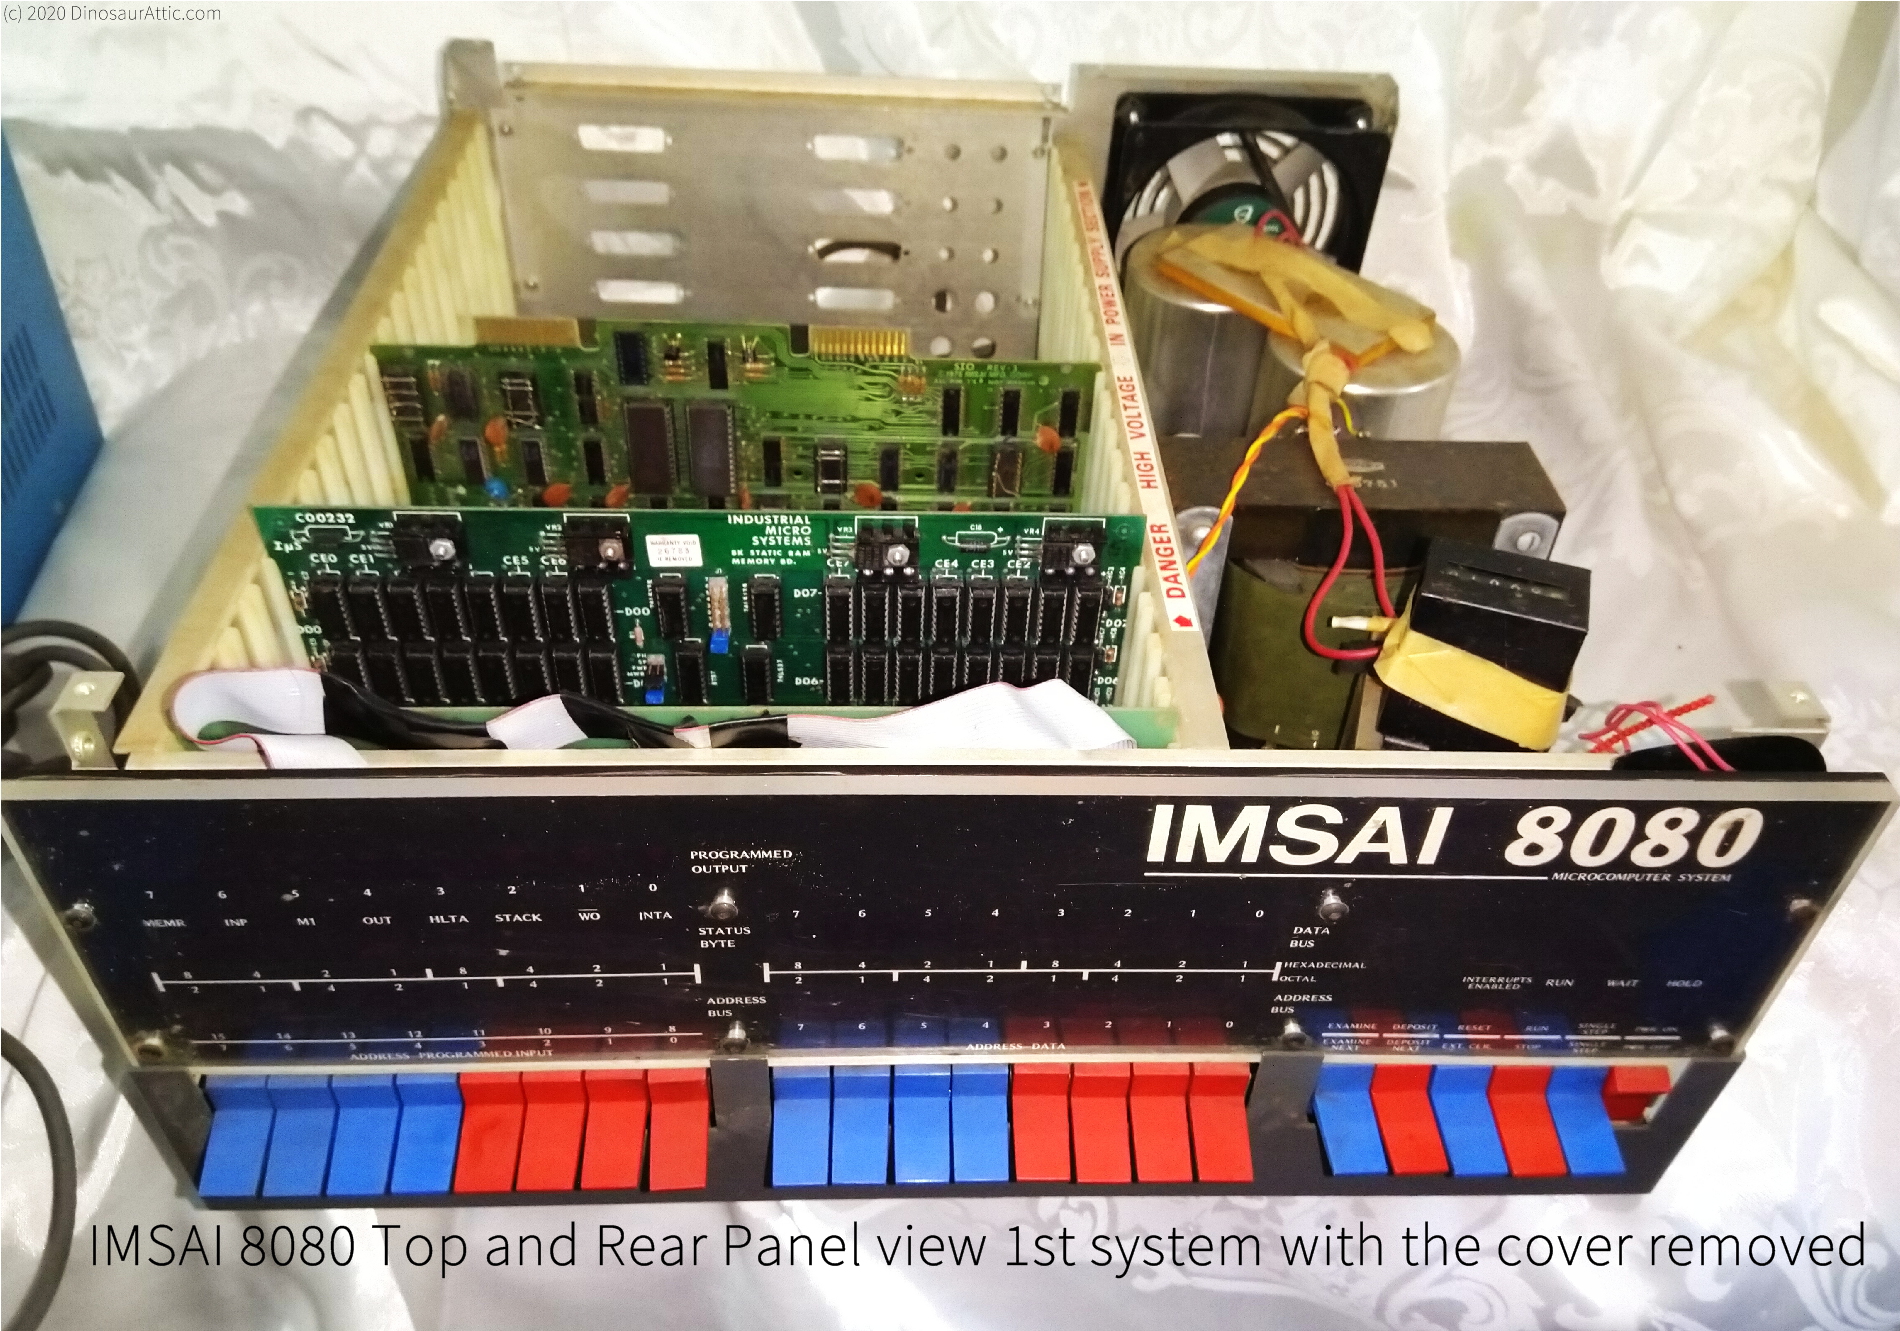 <b>IMSAI 8080 Top and Rear Panel view 1st system with the cover removed</b>